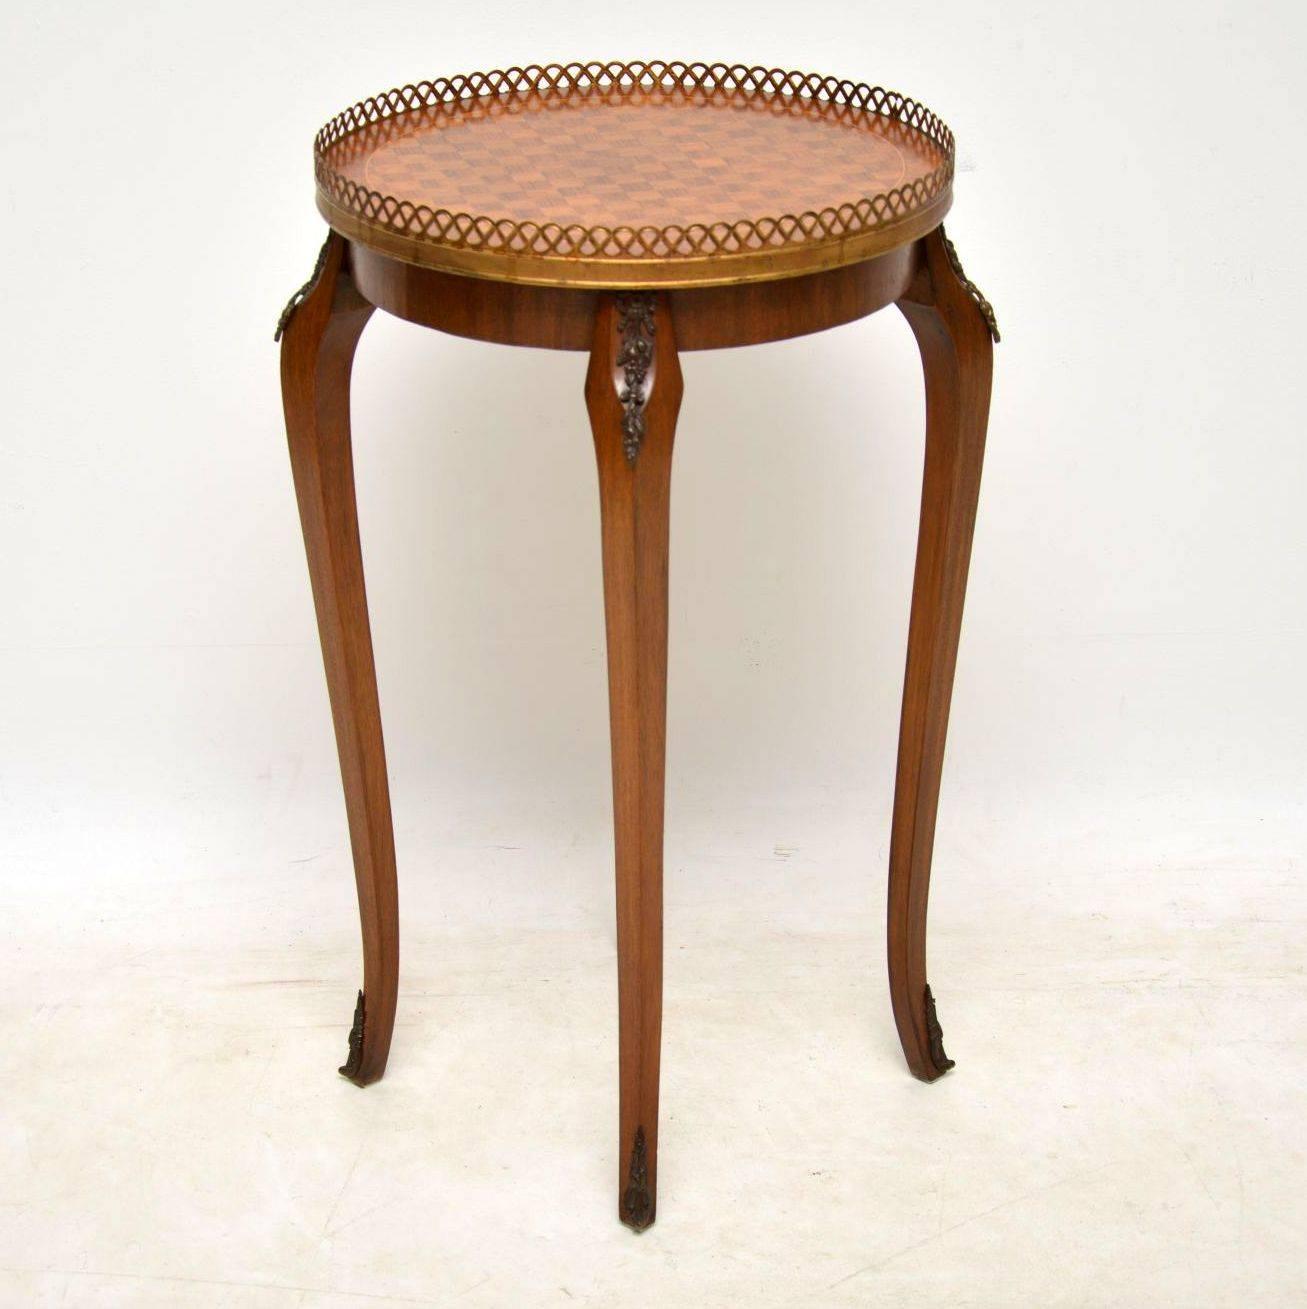 Edwardian Antique French Inlaid Parquetry Side Table